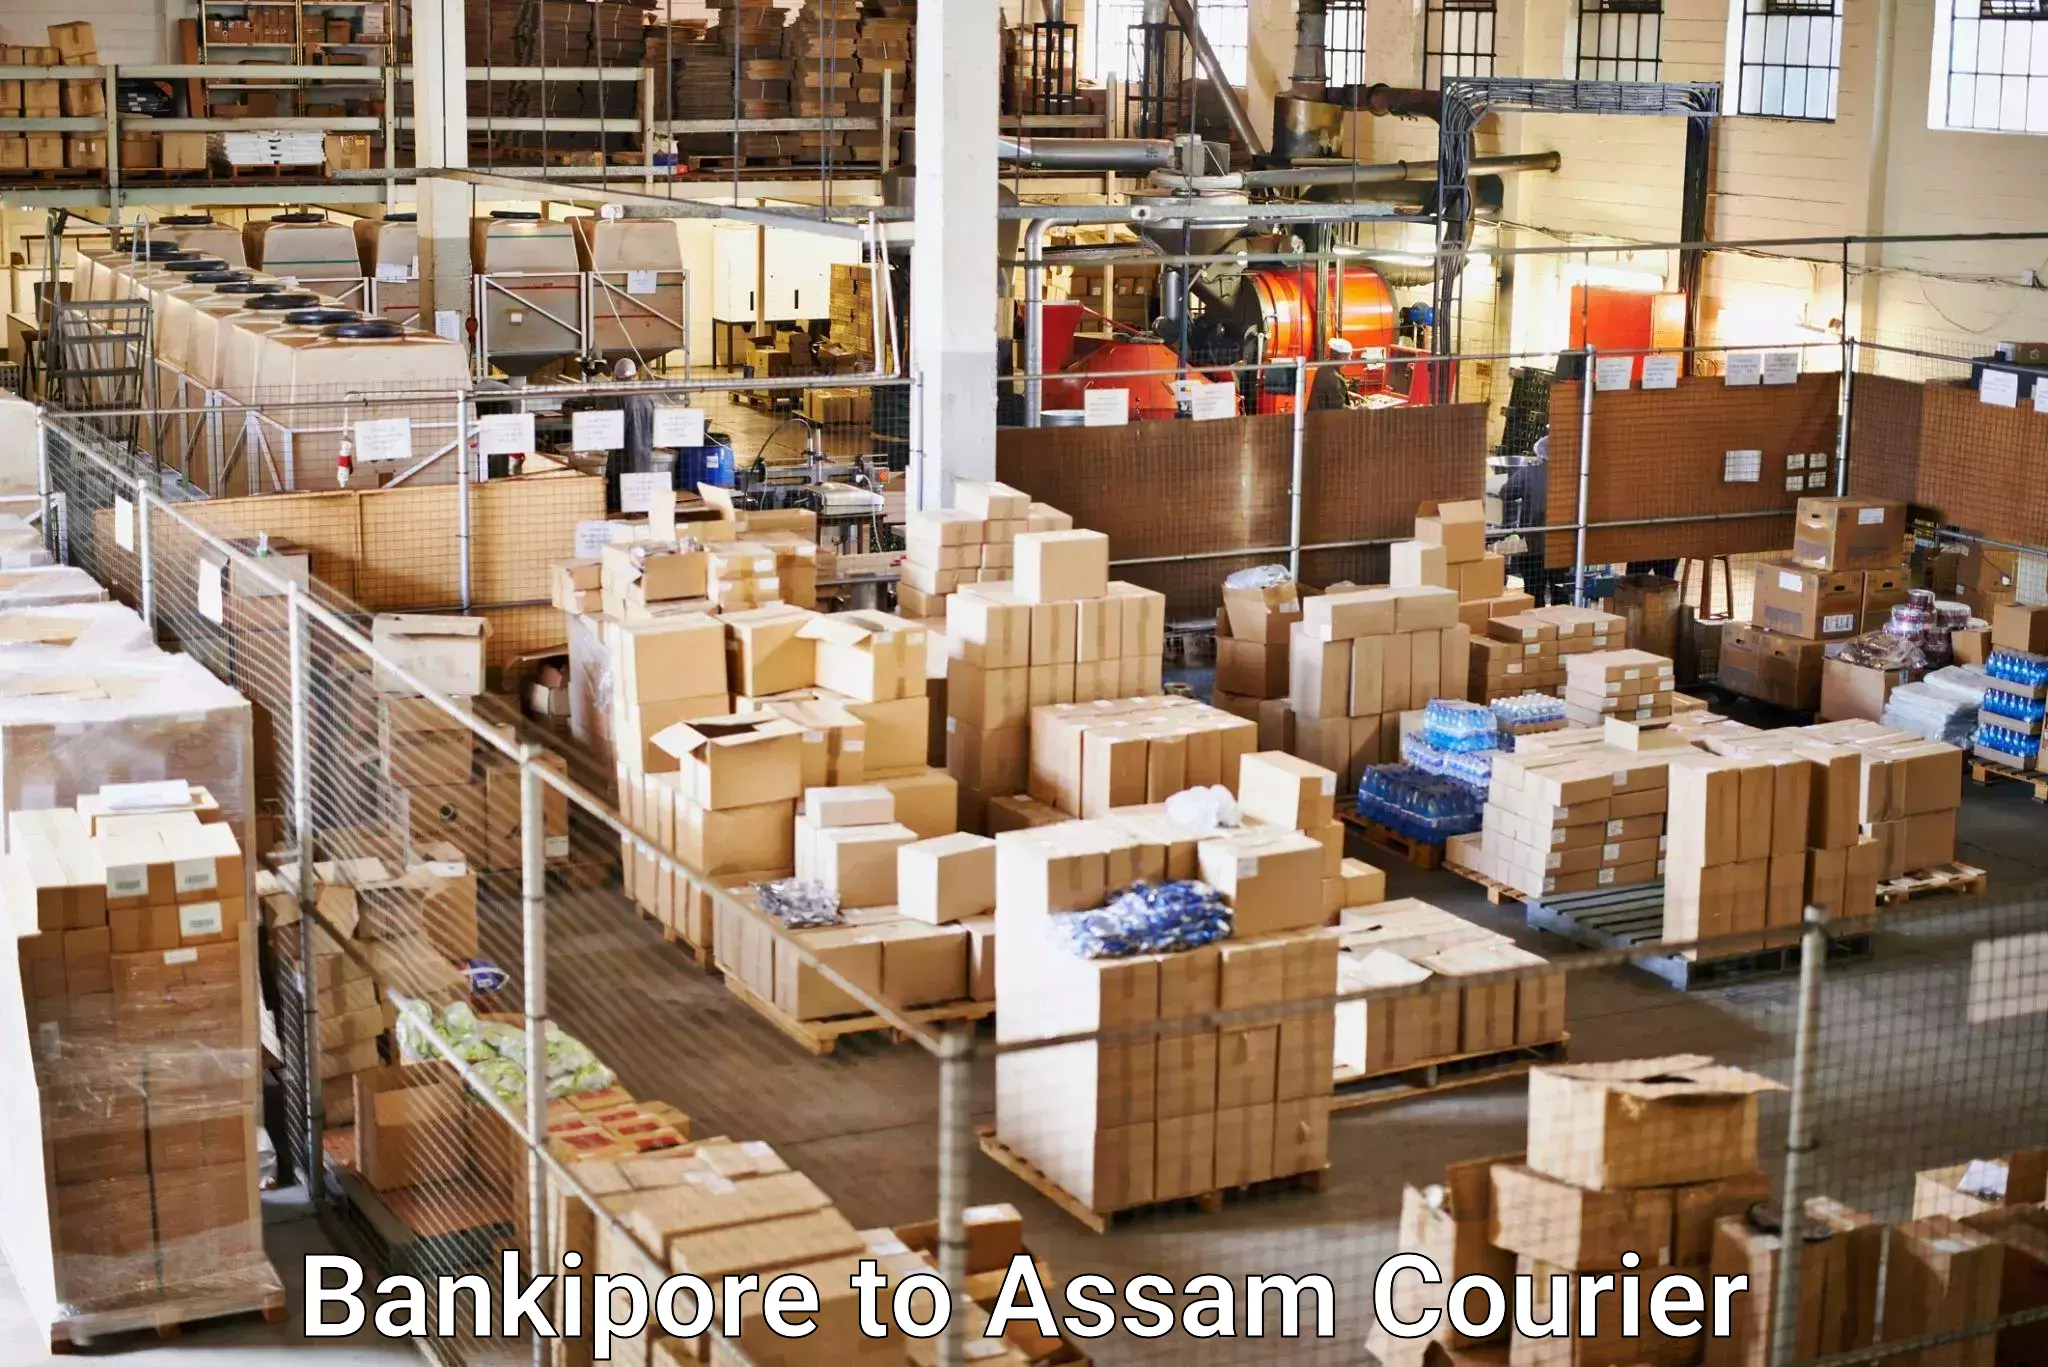 Parcel service for businesses Bankipore to Lala Assam